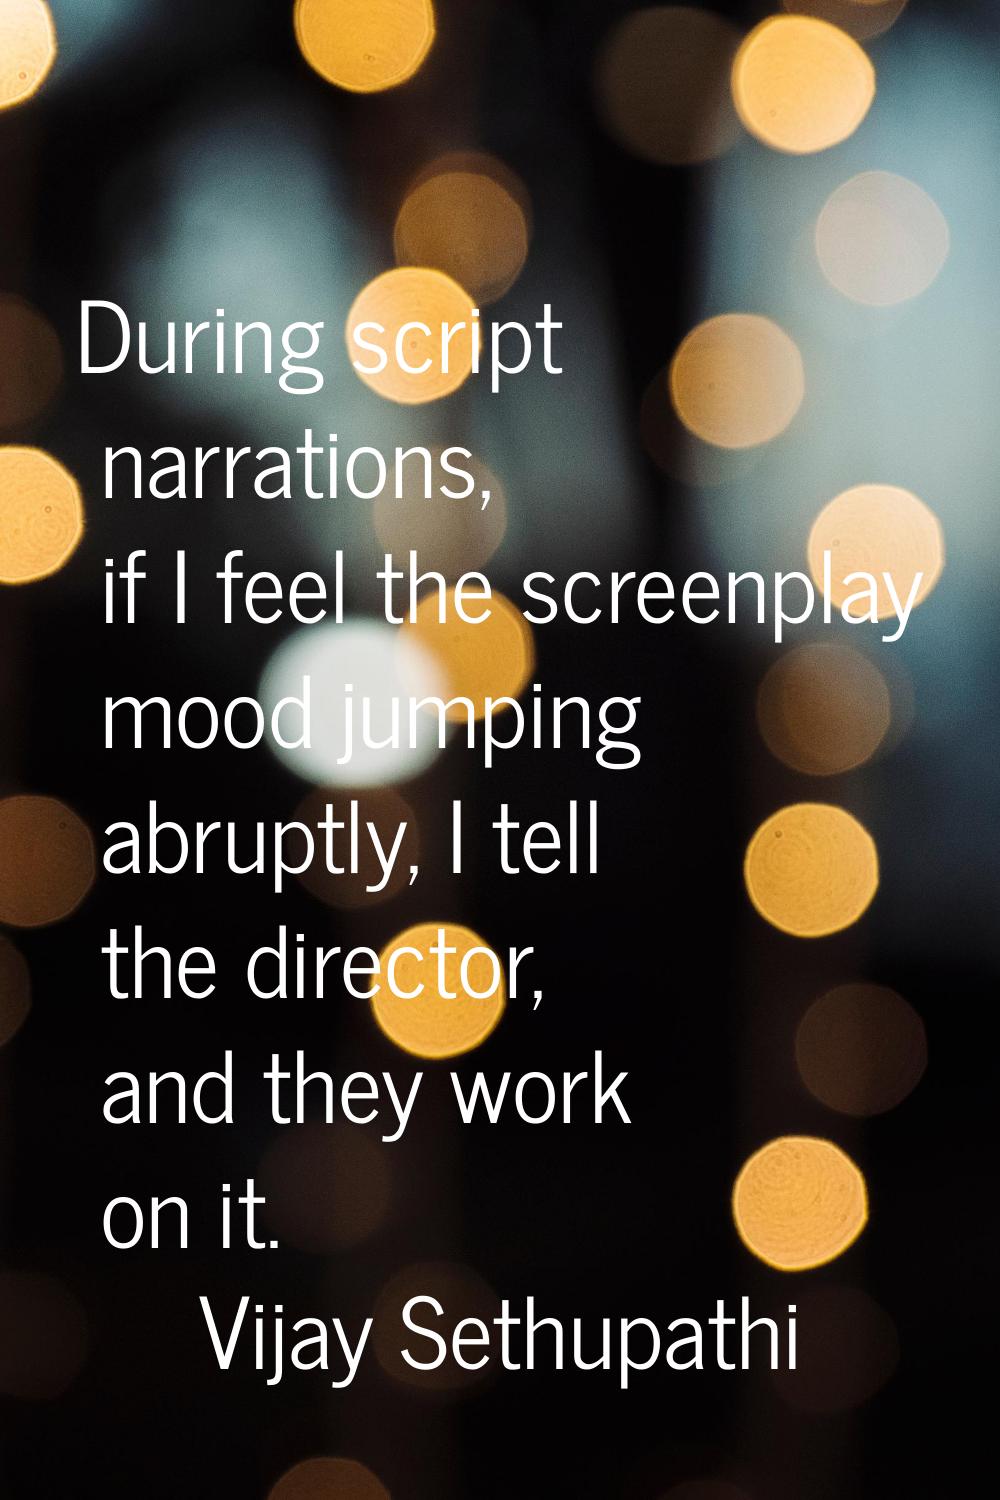 During script narrations, if I feel the screenplay mood jumping abruptly, I tell the director, and 